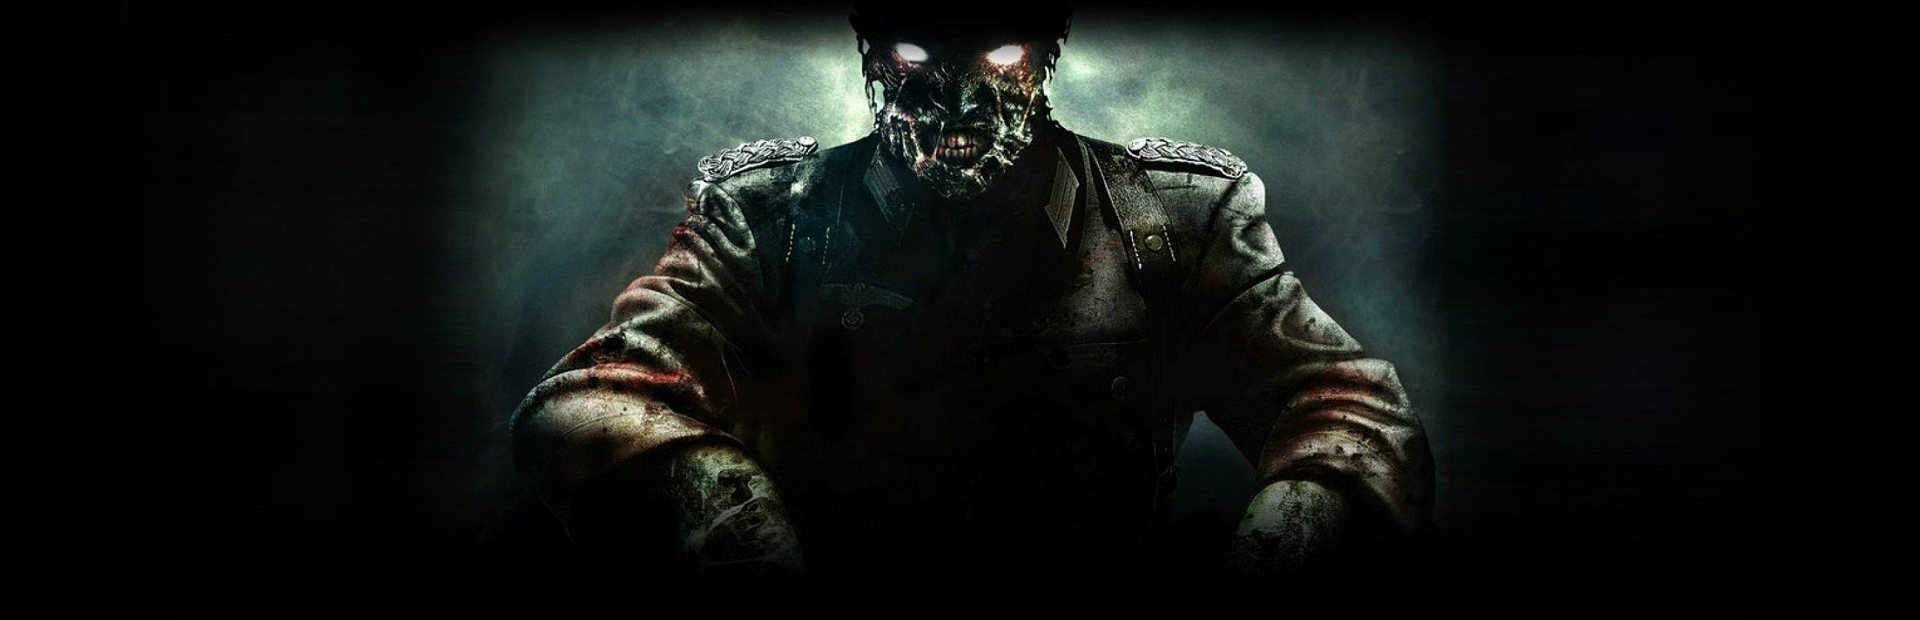 Call of Duty: Black Ops II: Zombies Images - LaunchBox Games Database